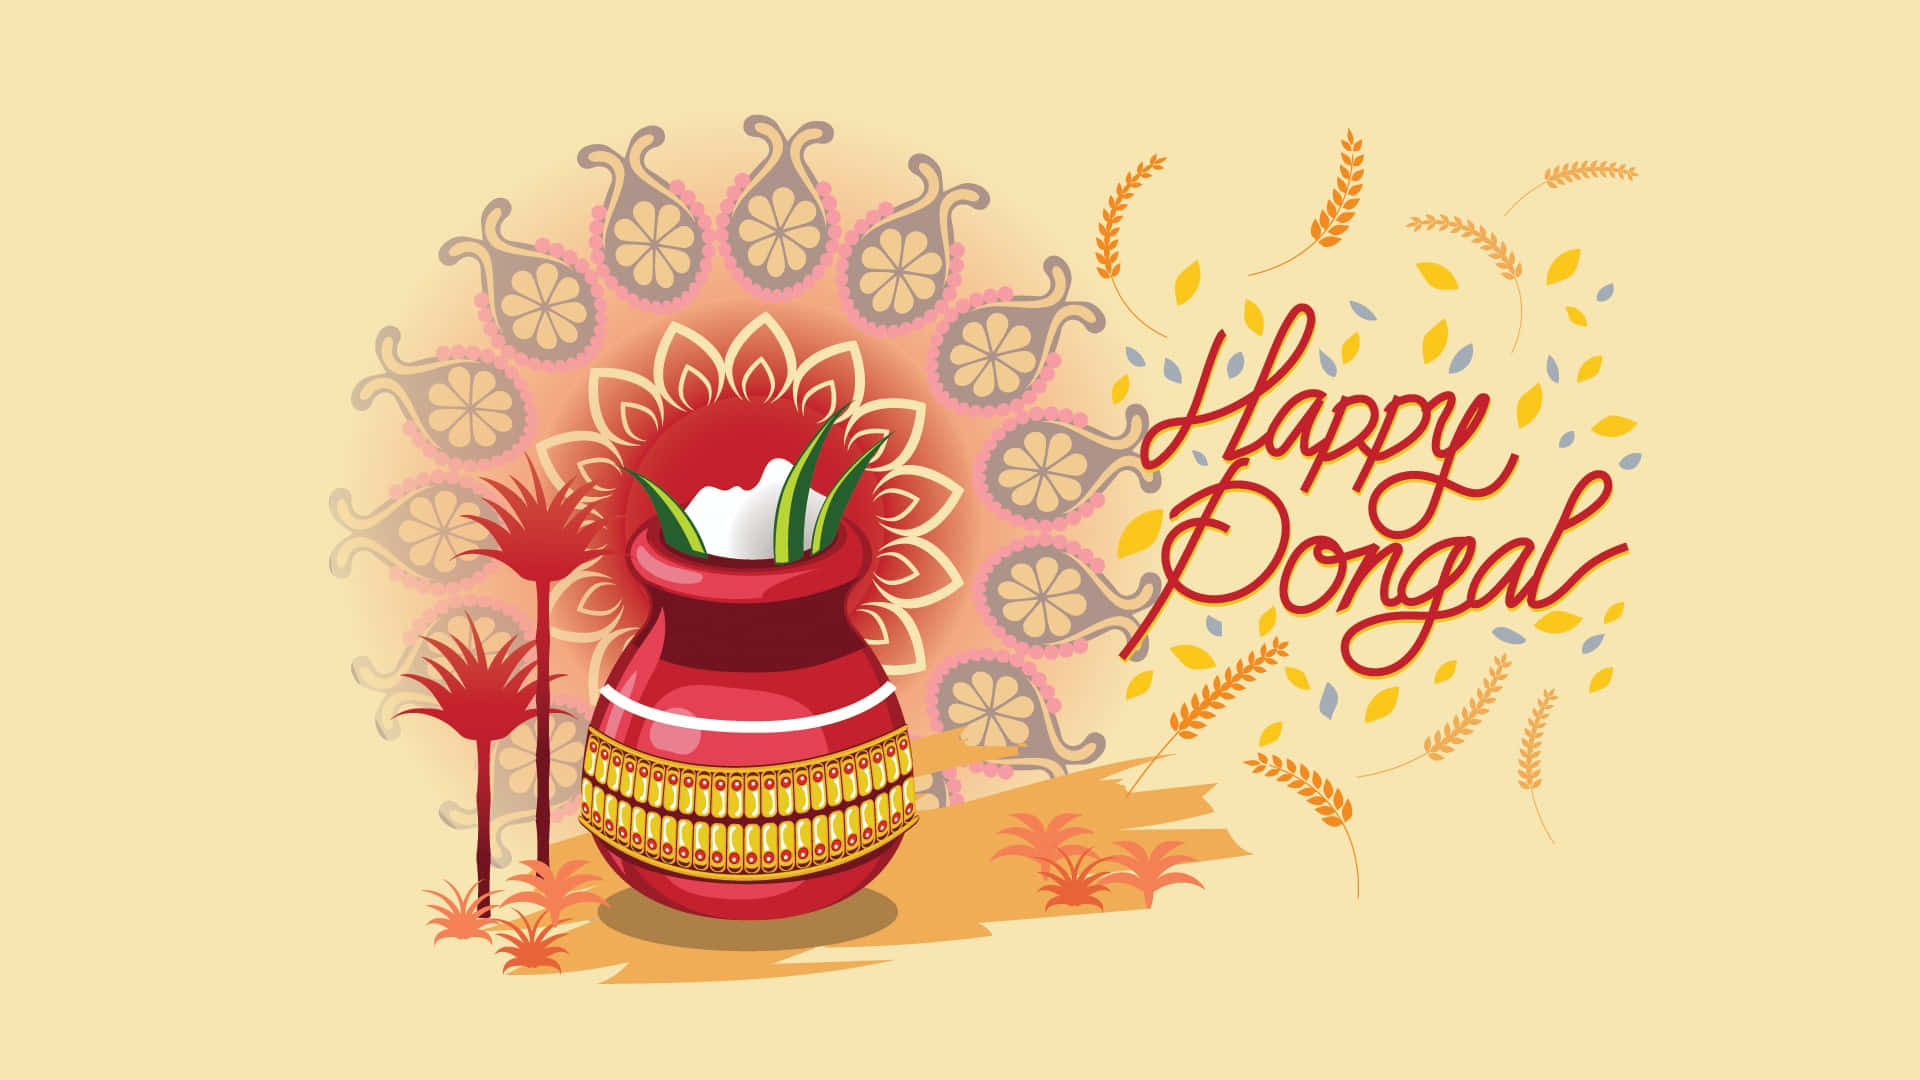 Celebrate Pongal and welcome the harvest season!